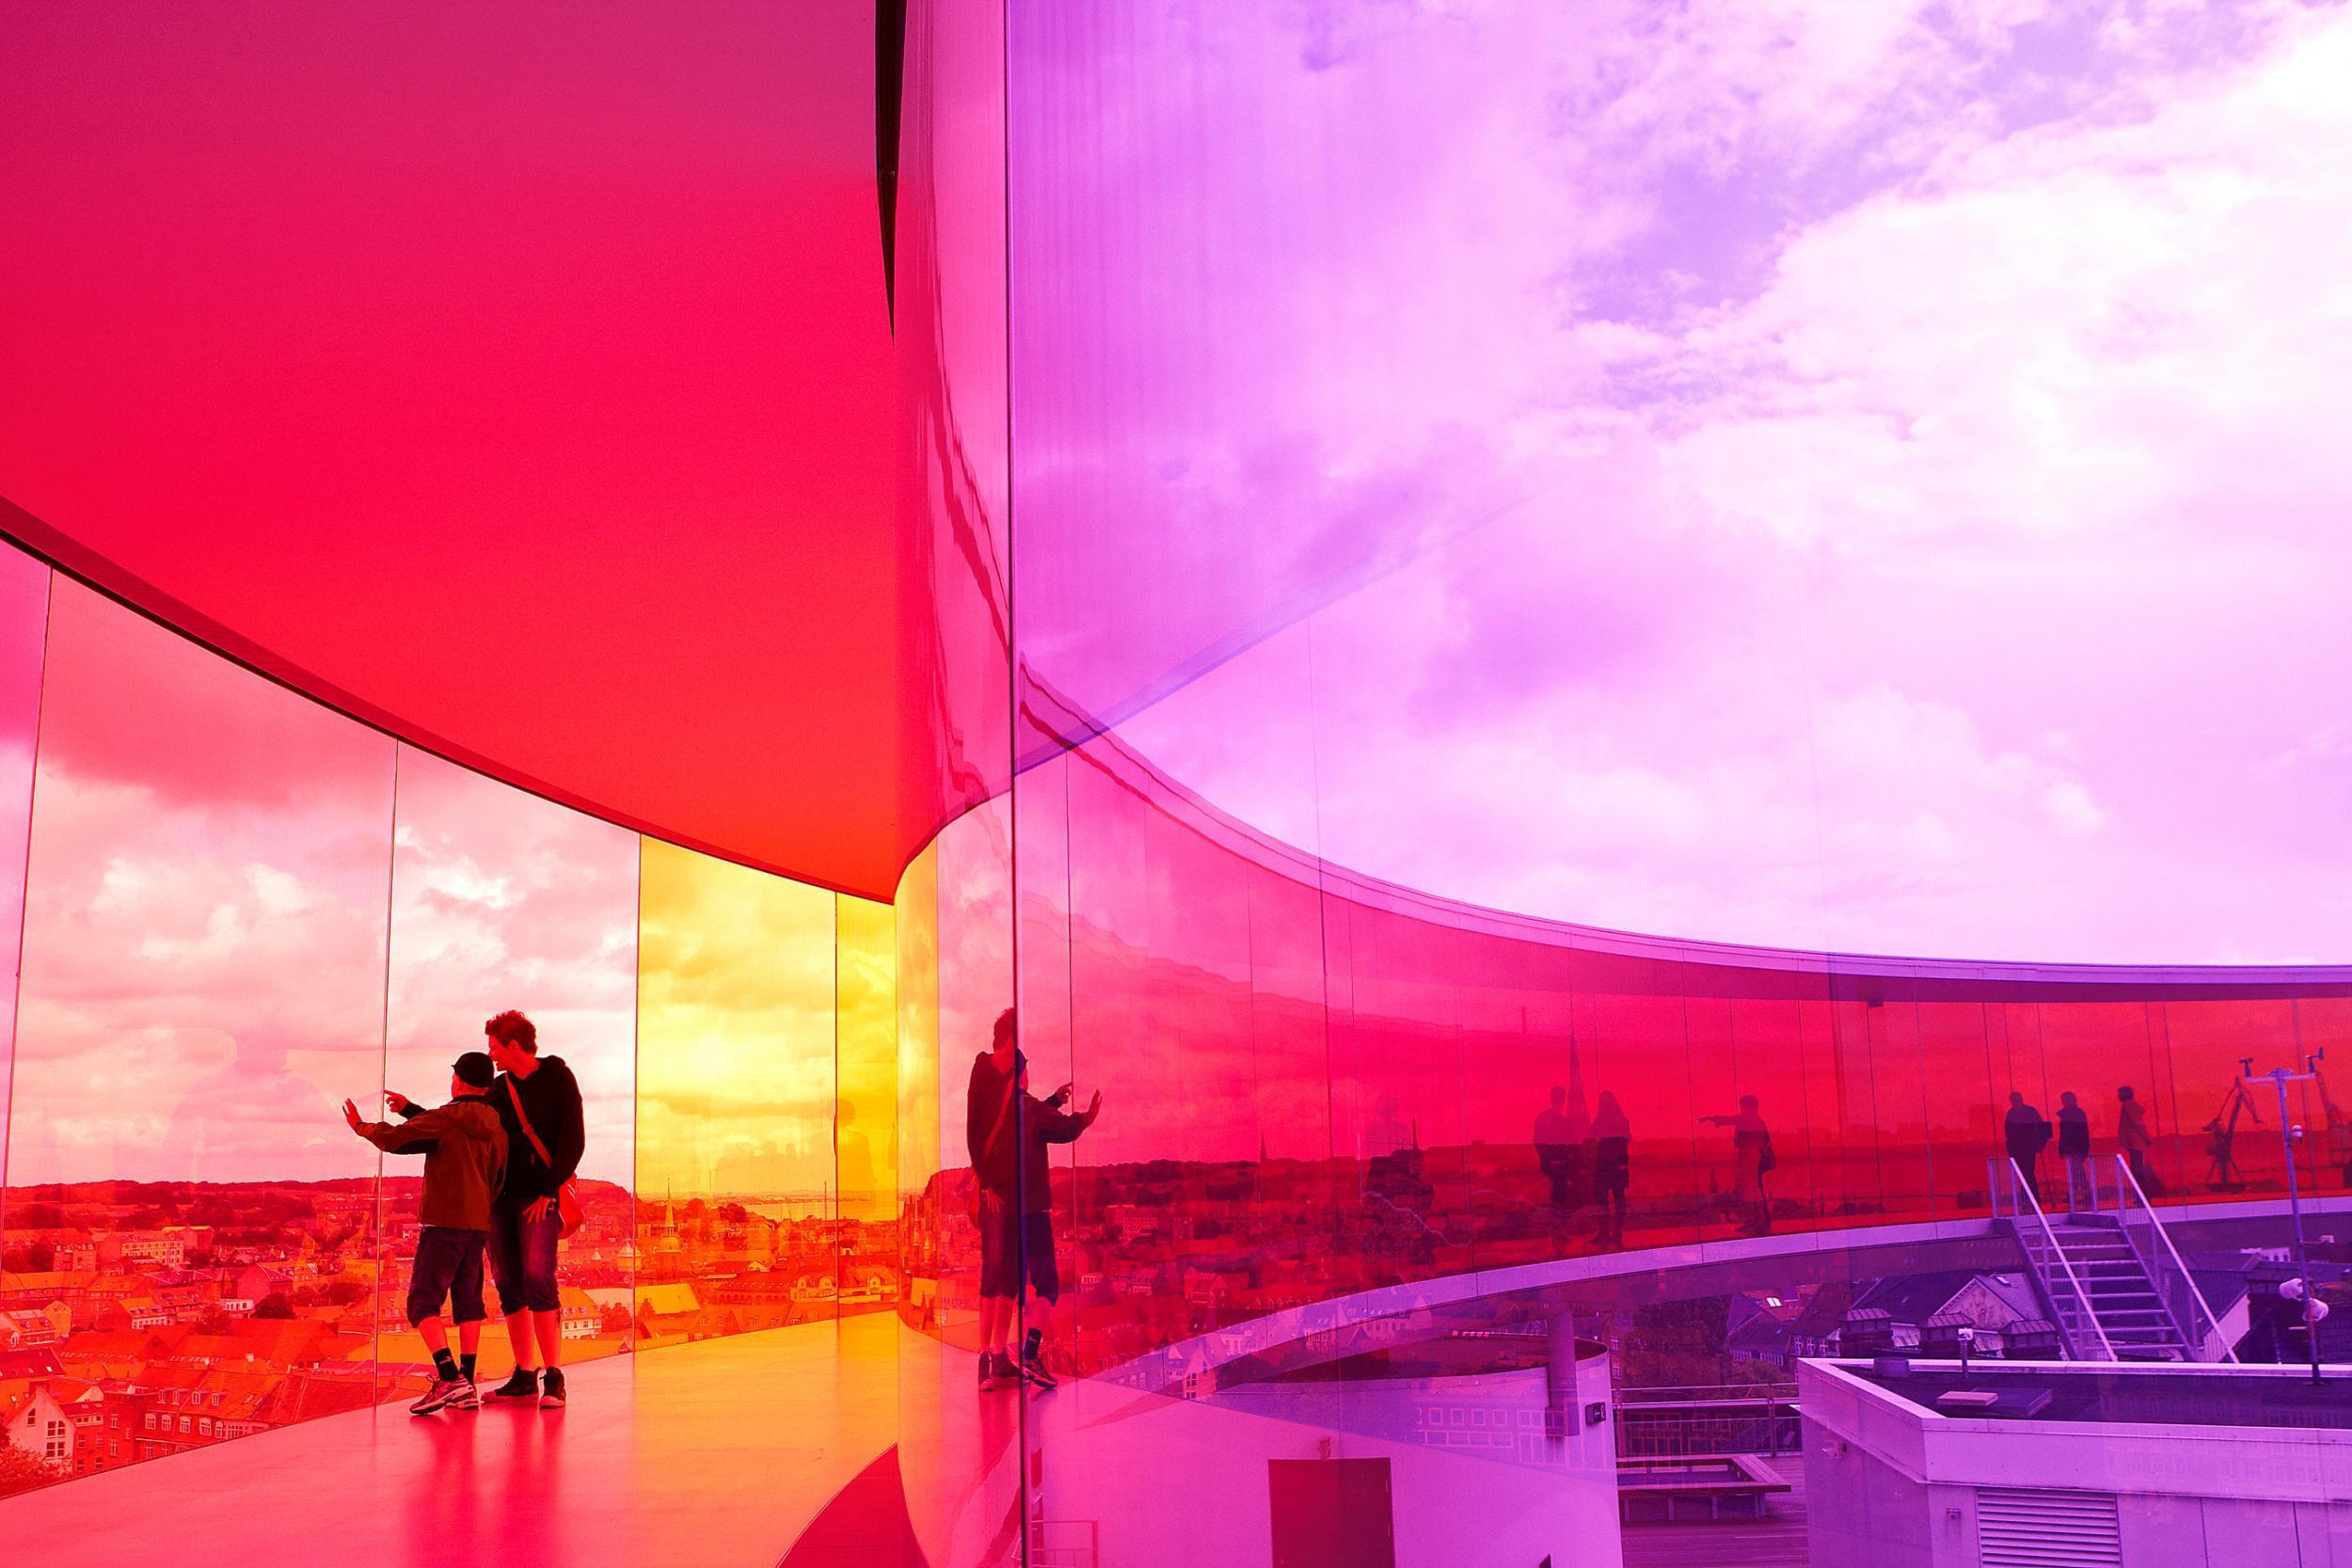 Glass act: experience 360 degree hues at Inside Your Panorama (Bech Poulsen/VisitDenmark)